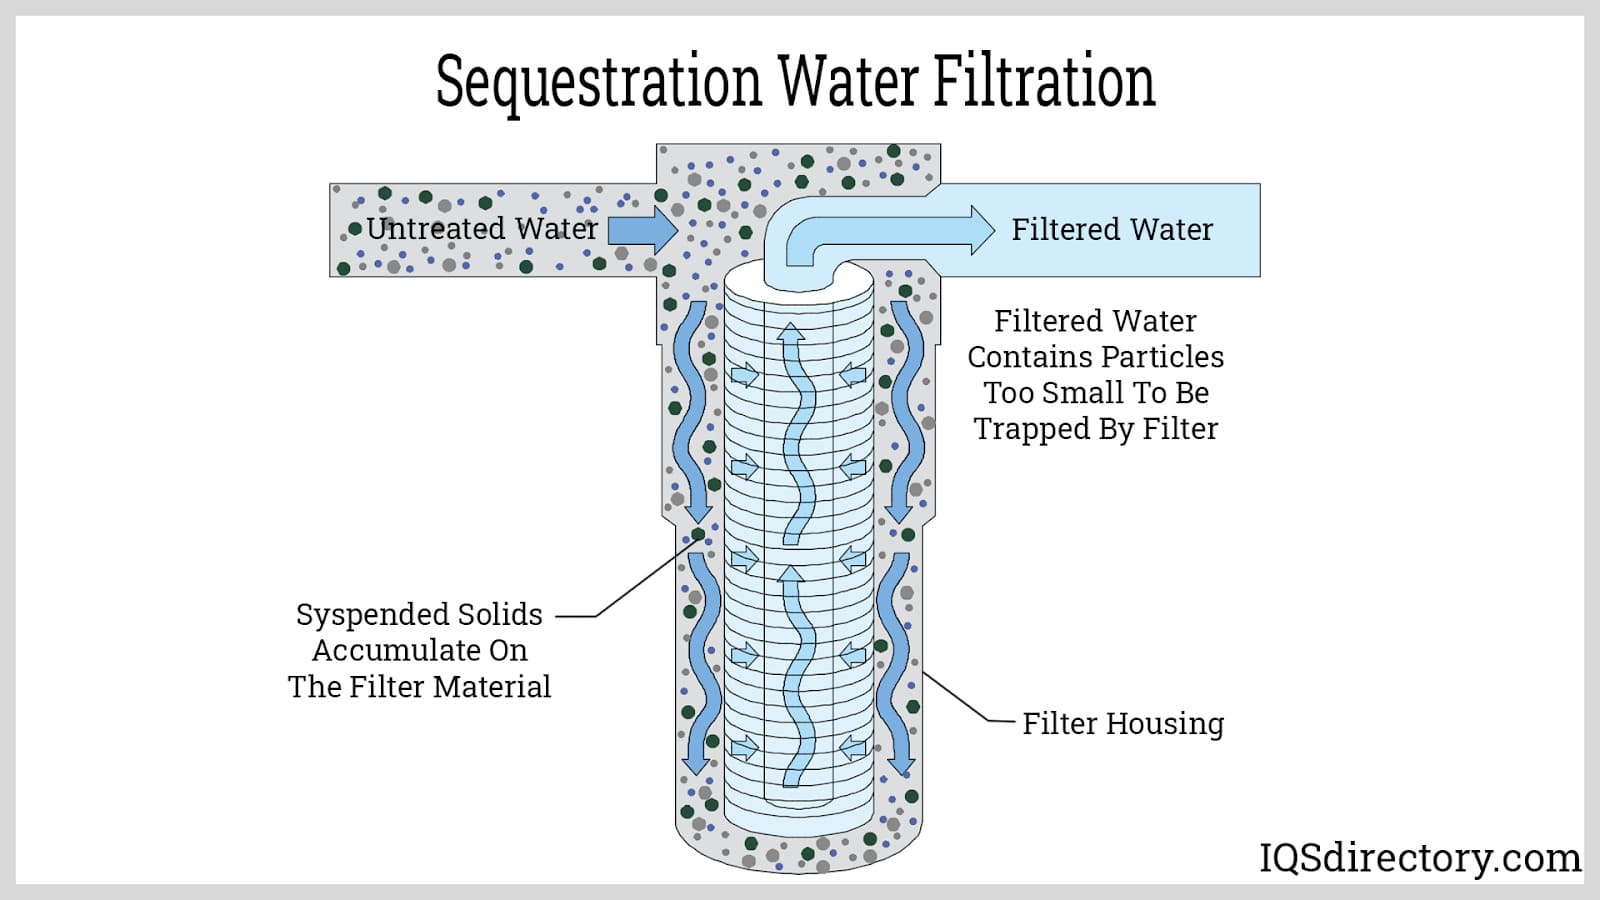 Sequestration Water Filtration